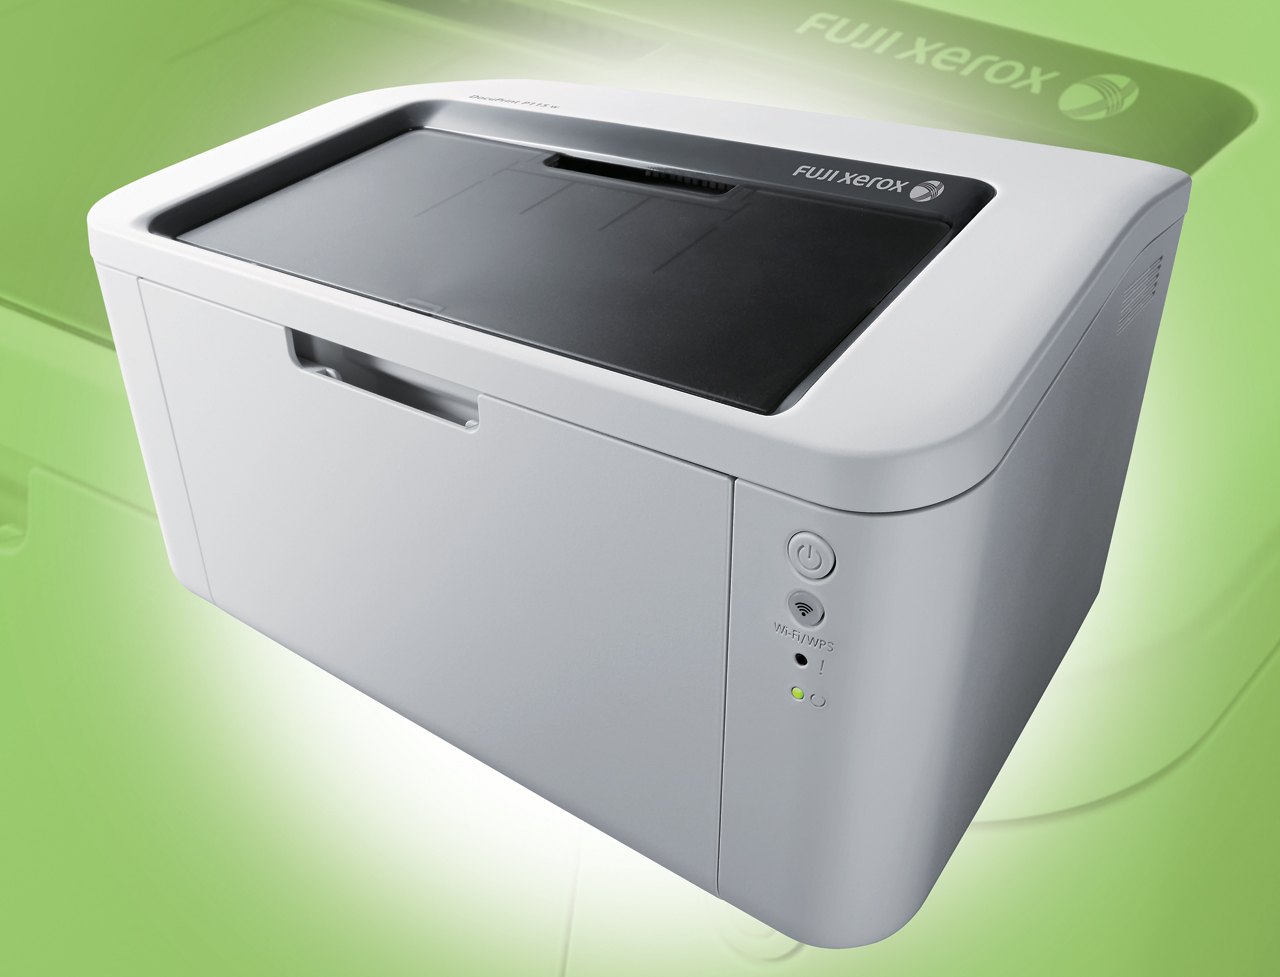 Fuji Xerox DocuPrint P115w Laser Printer For Just Php 1,999 Only!